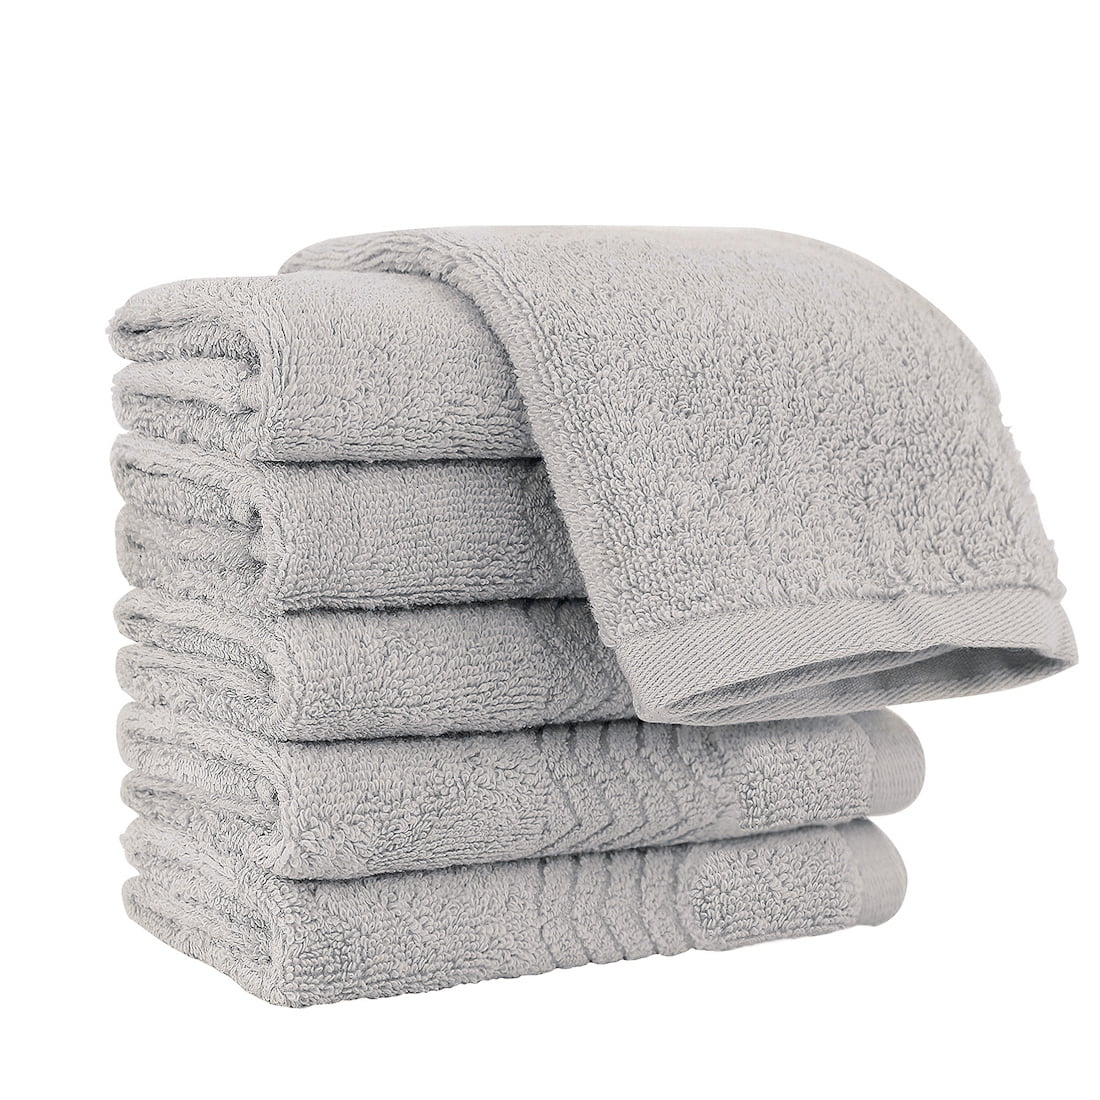 13x13 Inches Highly Absorbent wolfroad 100/% Cotton Hand Towels Set of 6, Brown